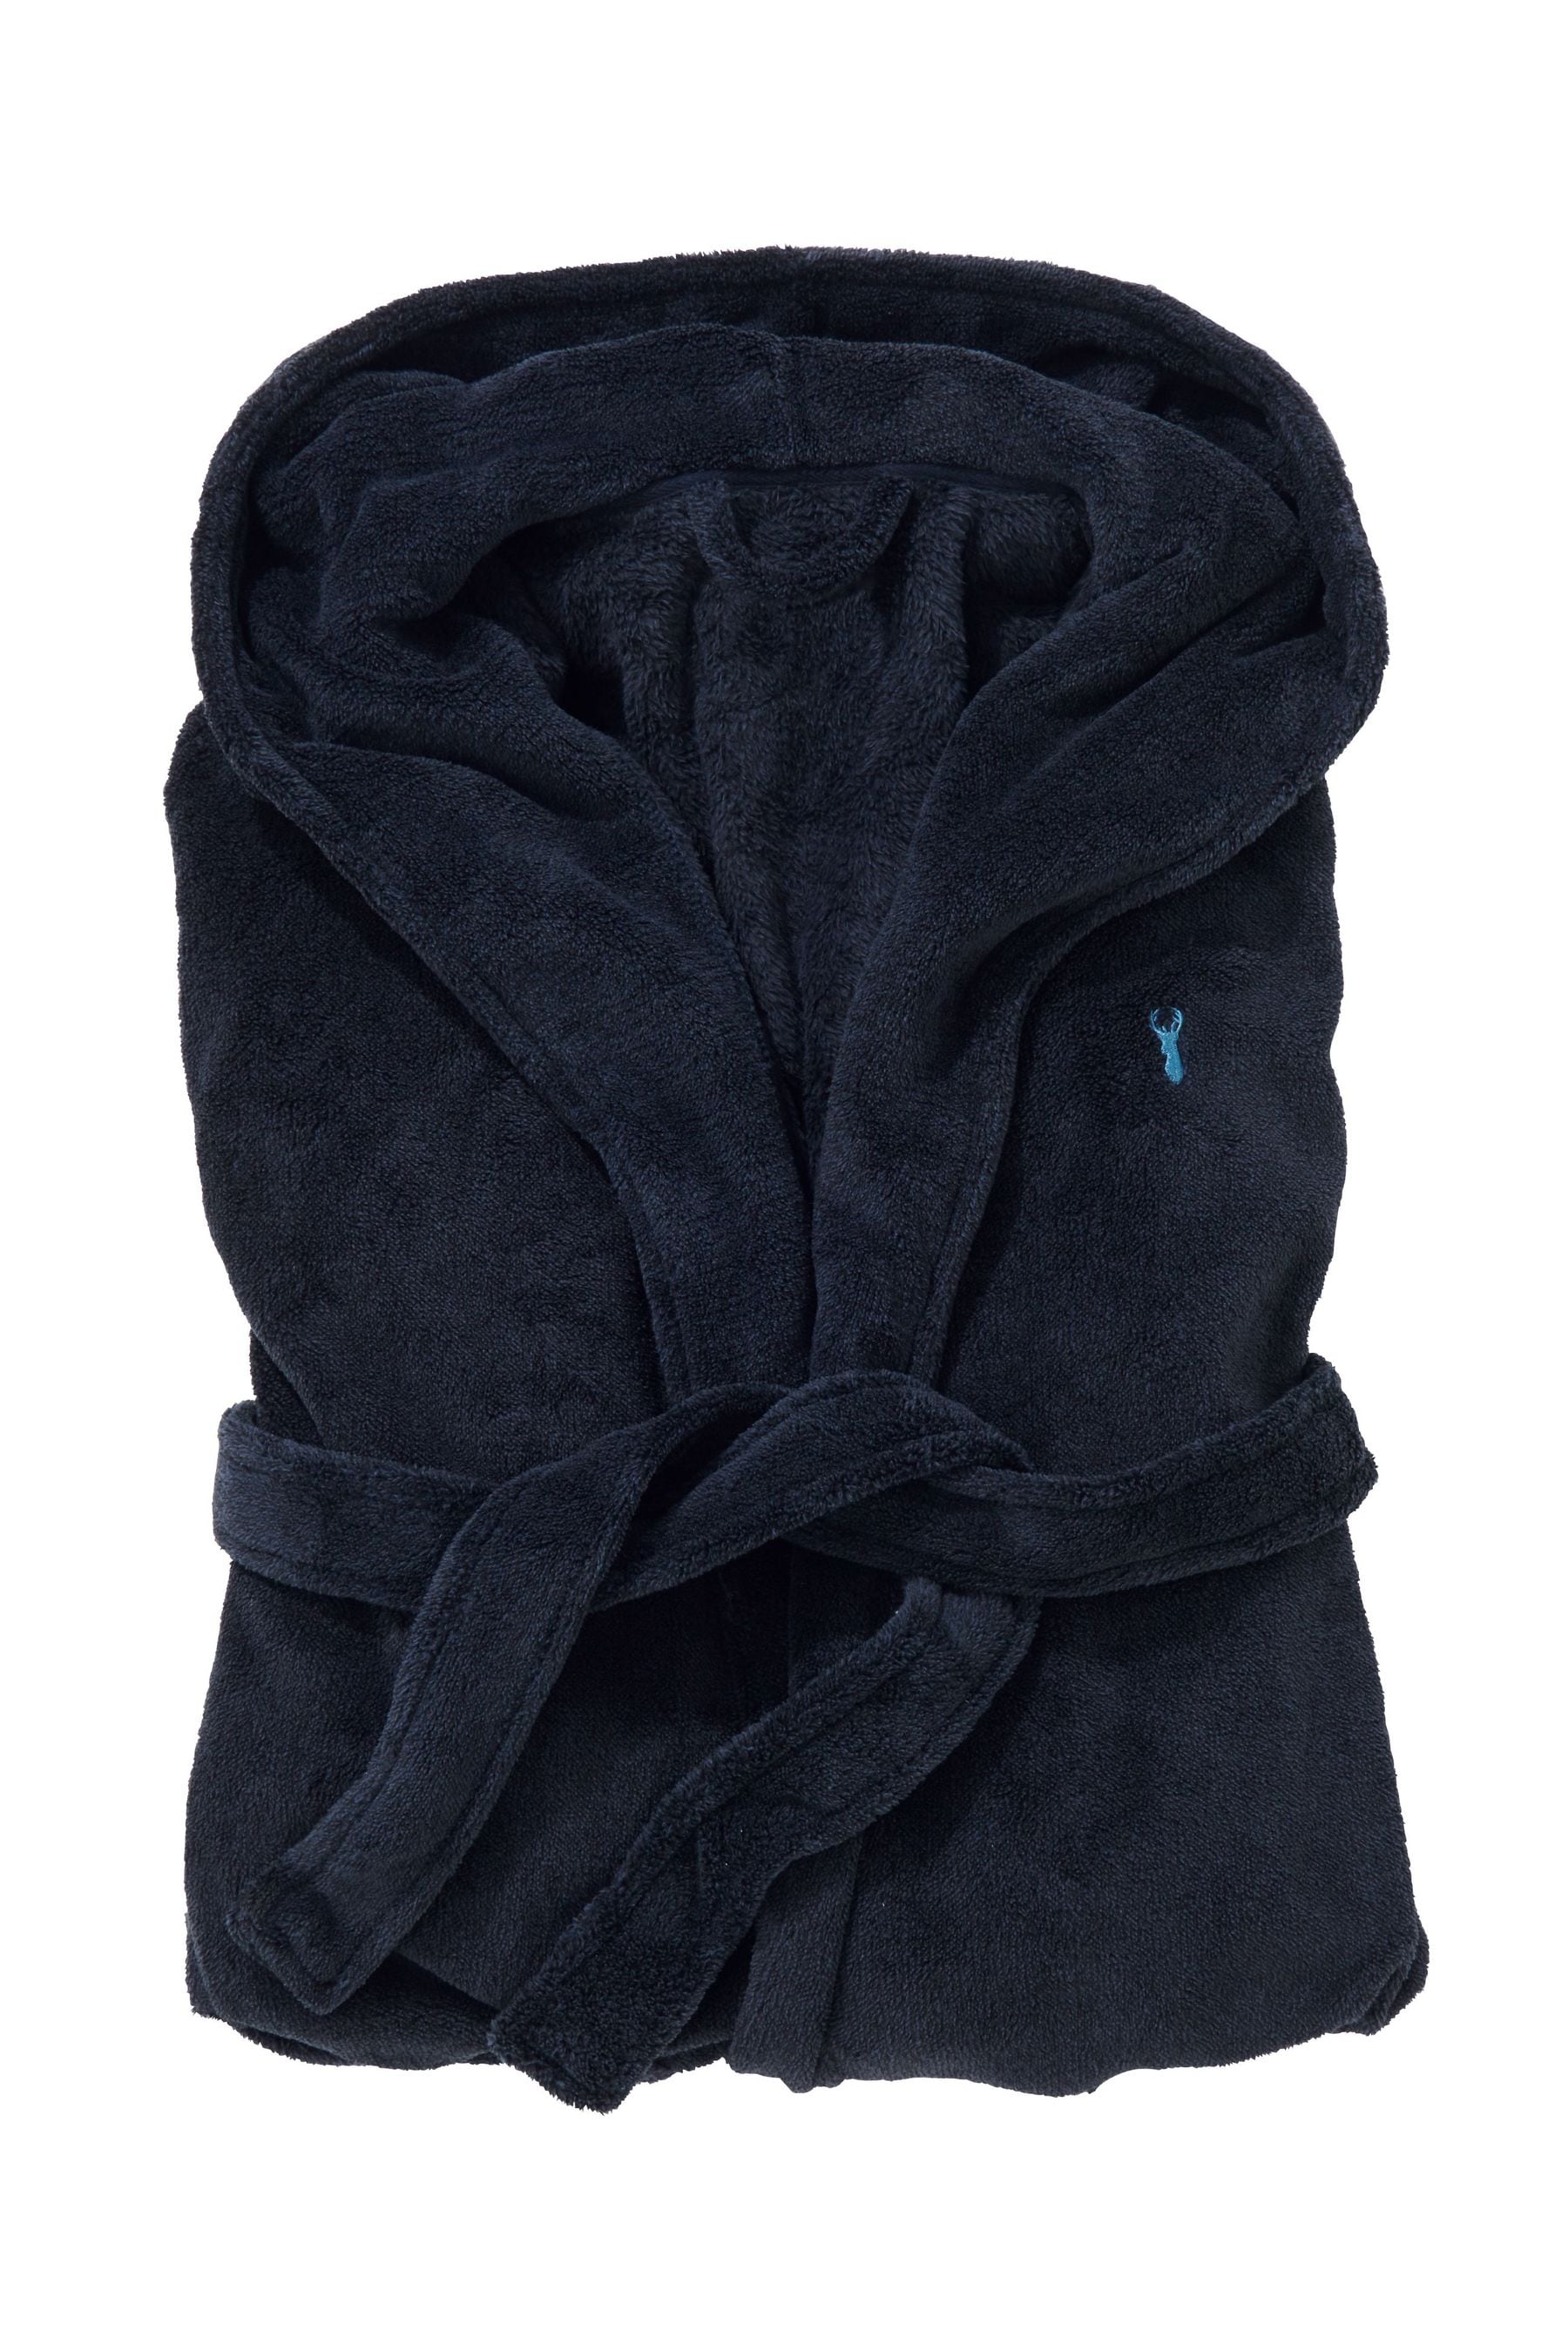 Buy Navy Blue Supersoft Hooded Dressing Gown from the Next UK online shop